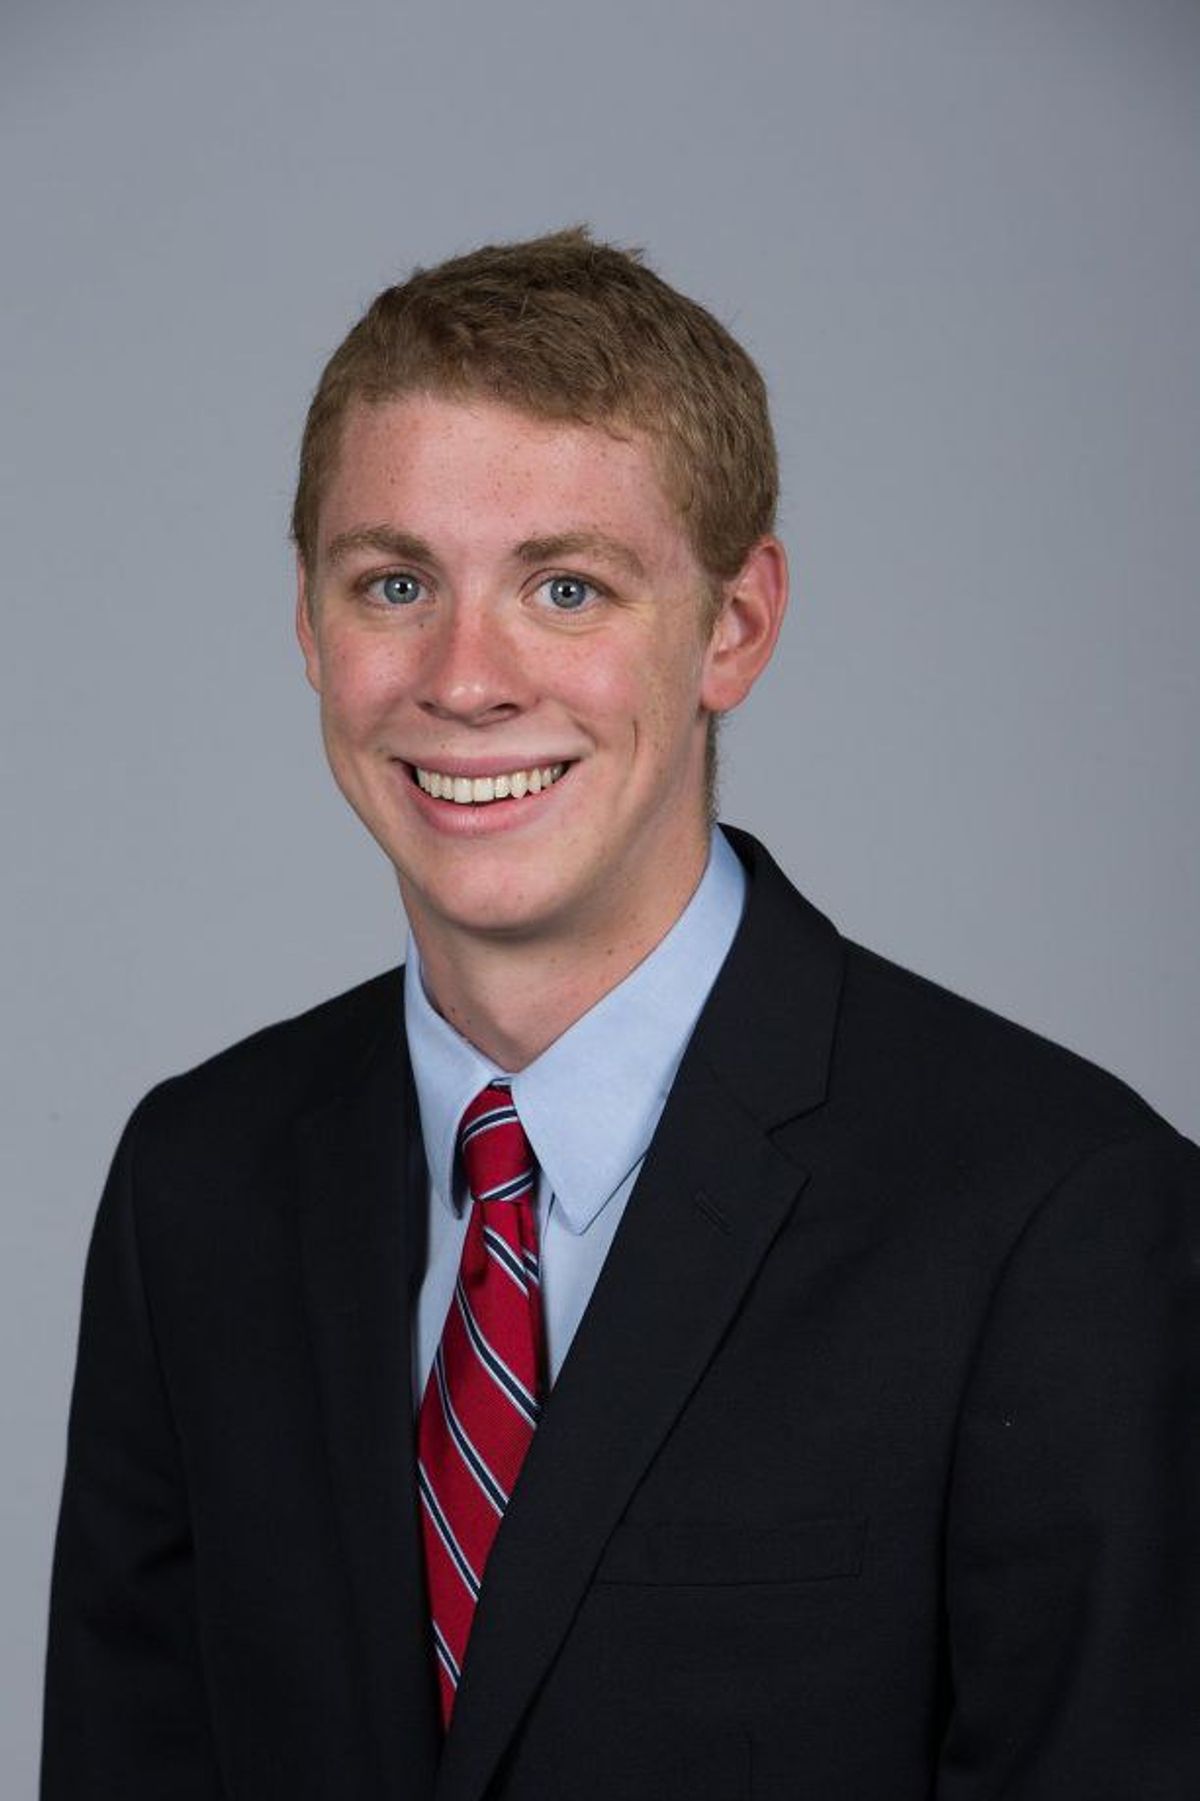 The Short Sentence With A Lasting Effect: The Stanford Rapist